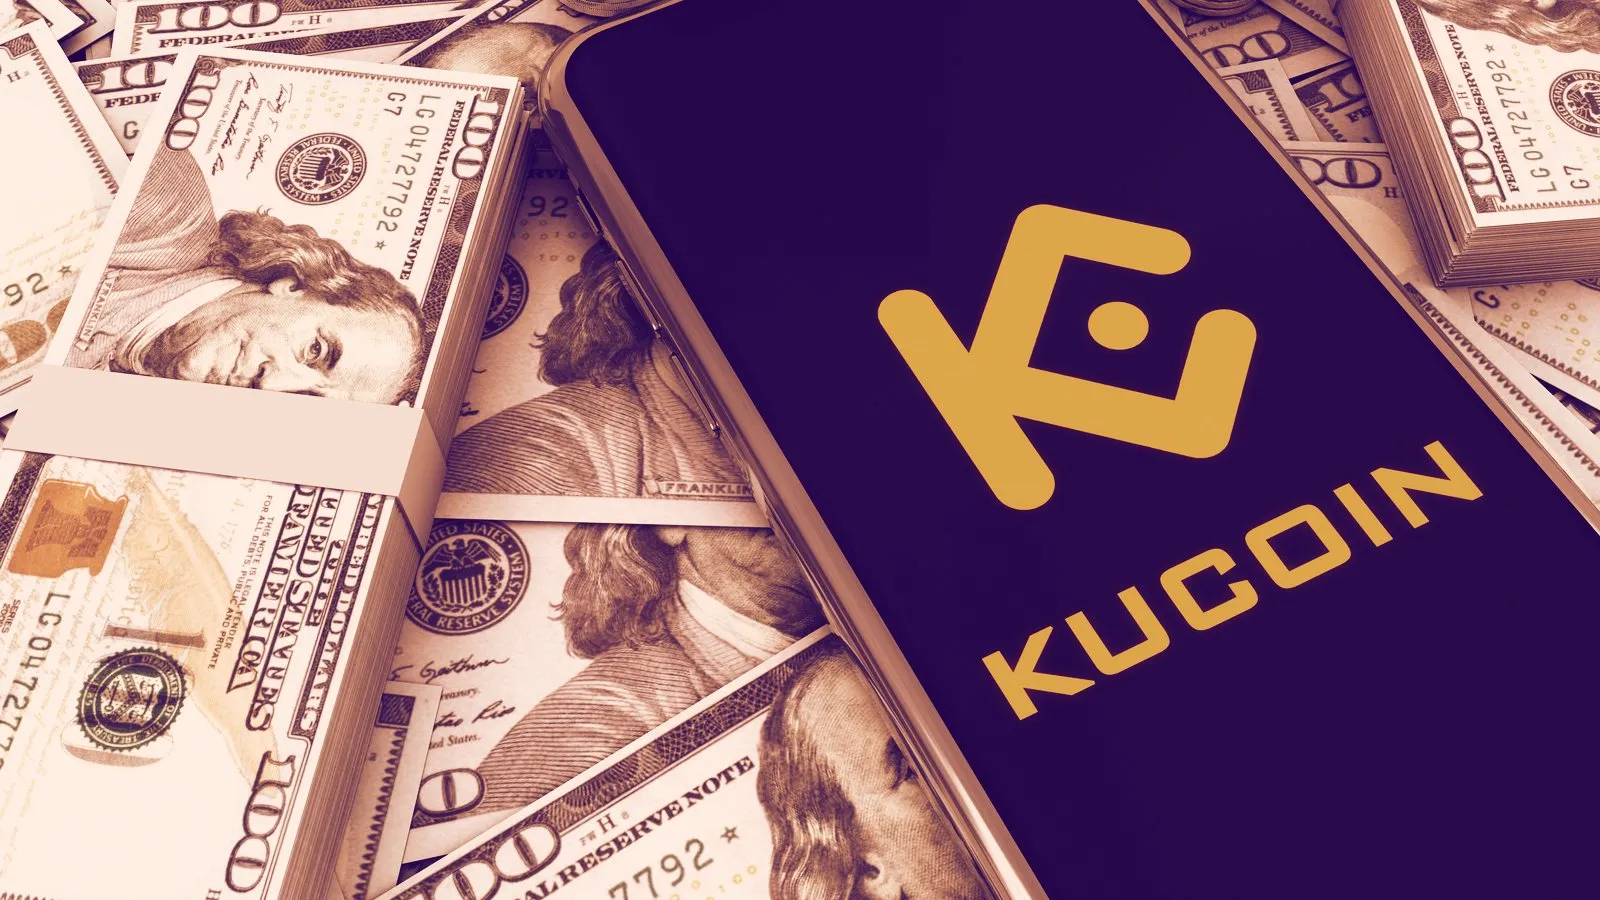 KuCoin is a cryptocurrency exchange. Image: Shutterstock